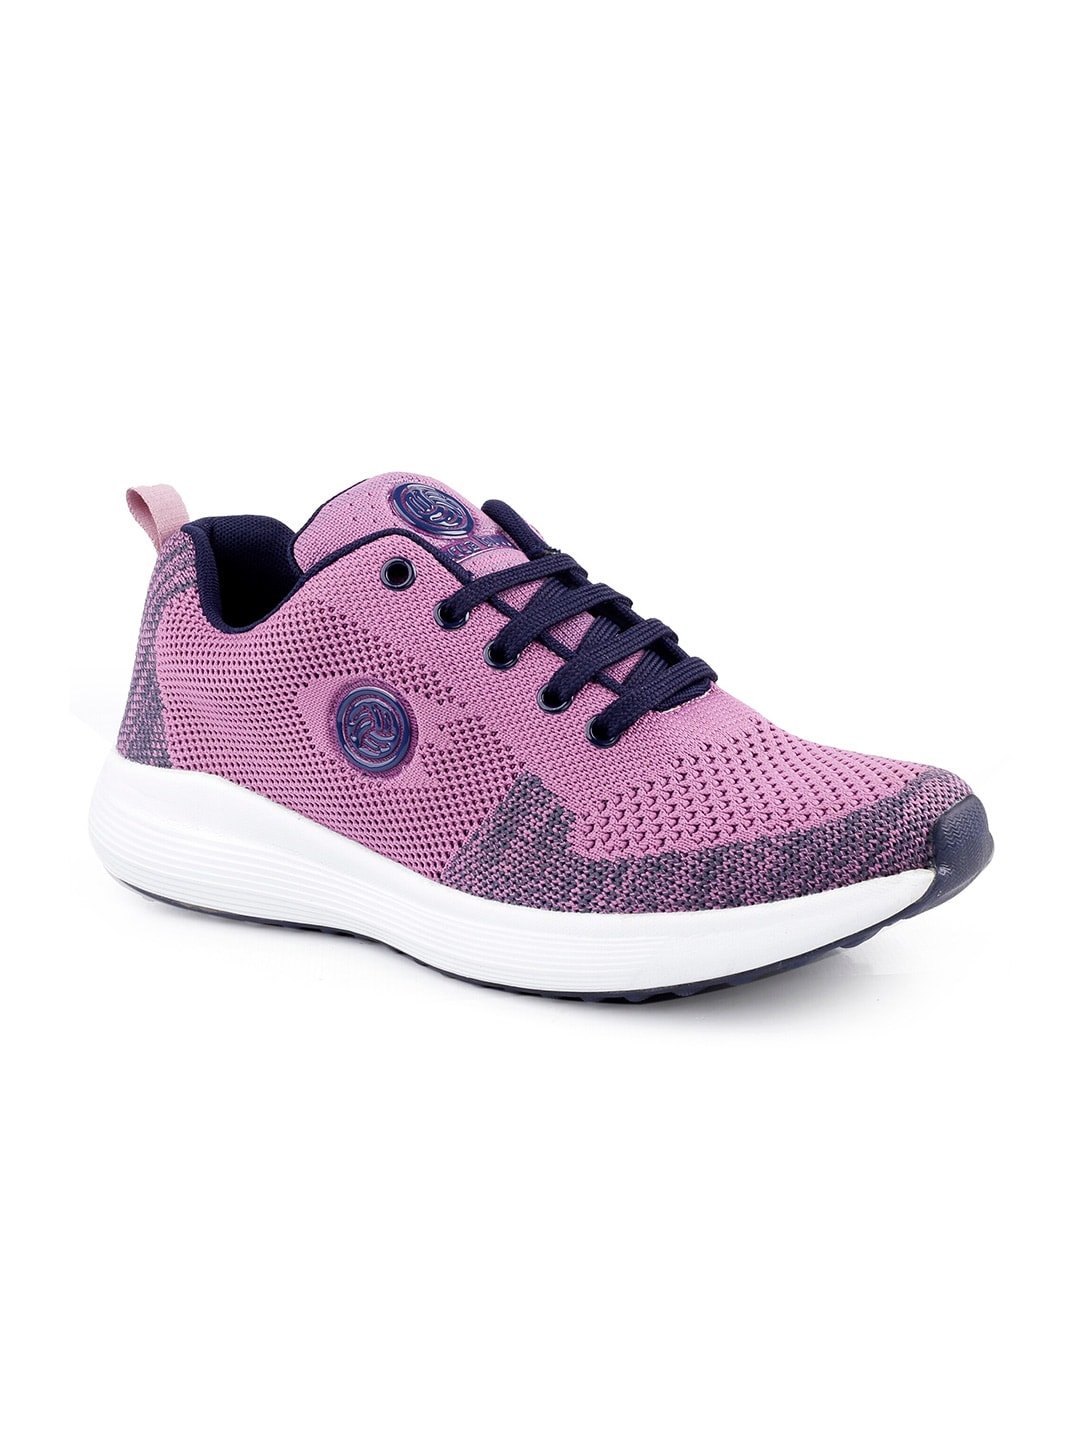 bacca bucci Women Pink Mesh Running Non-Marking Shoes Price in India